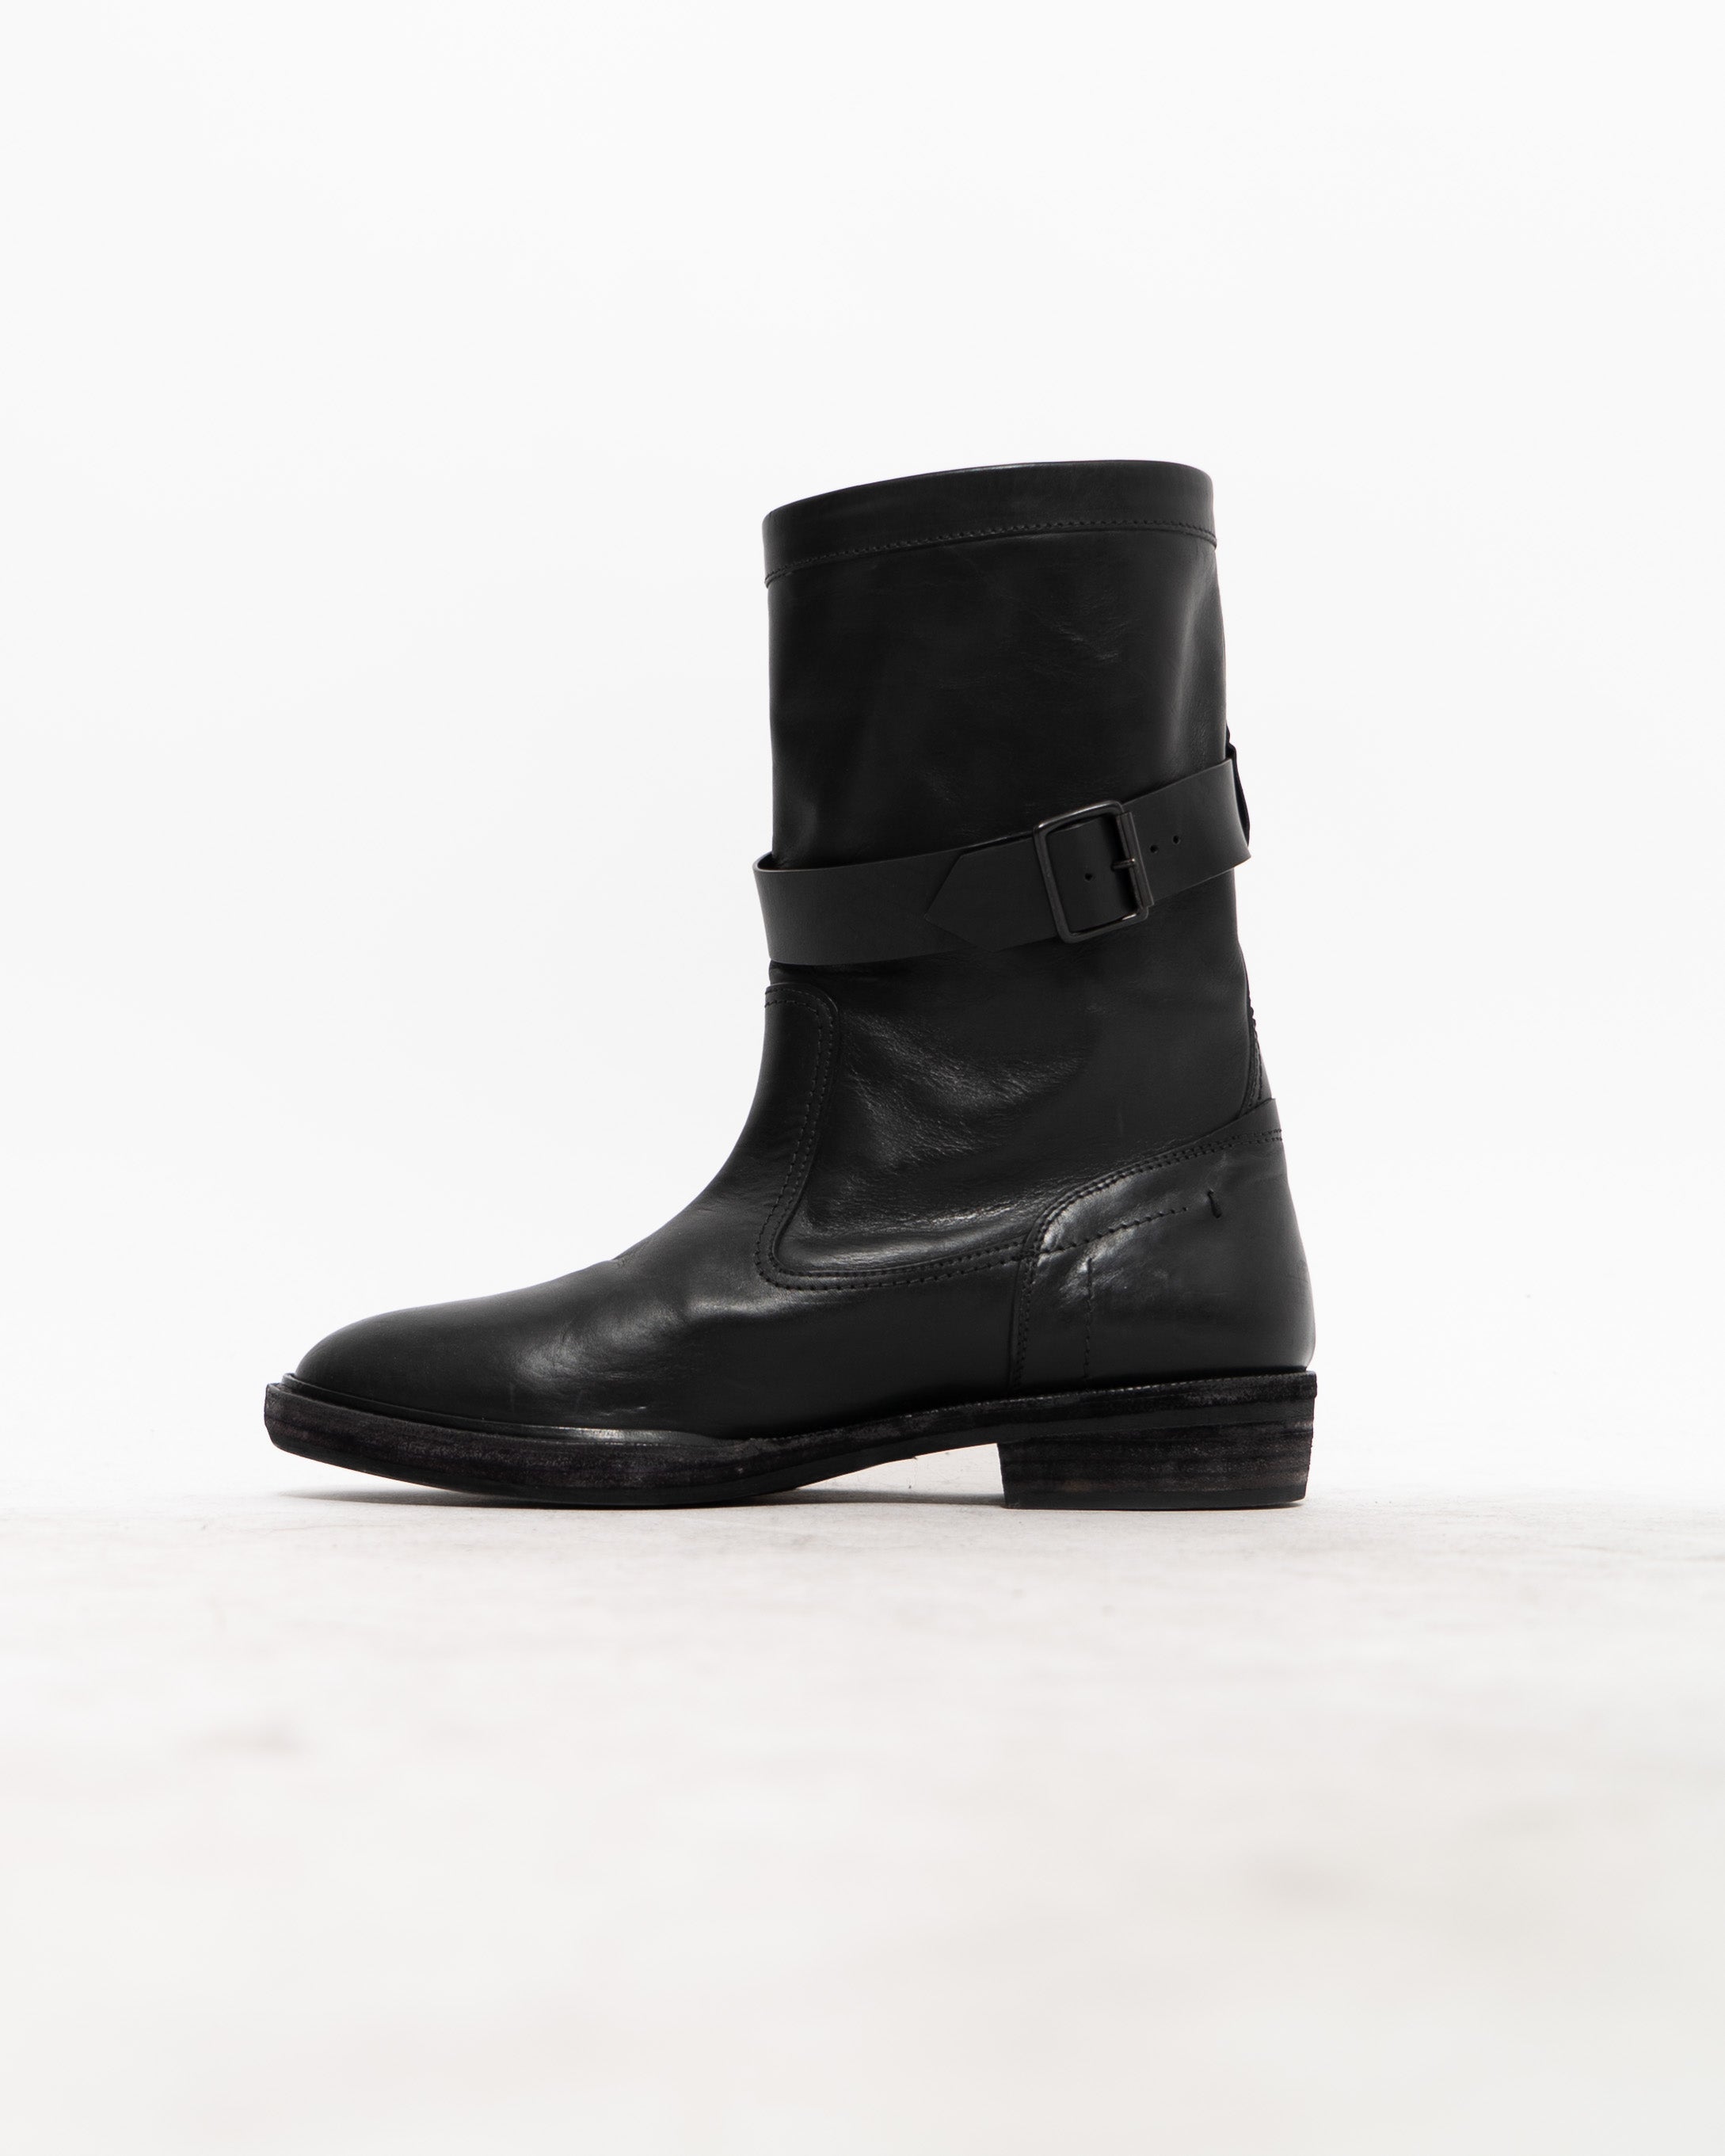 FW17 Black Dean Engeneer Leather Boots